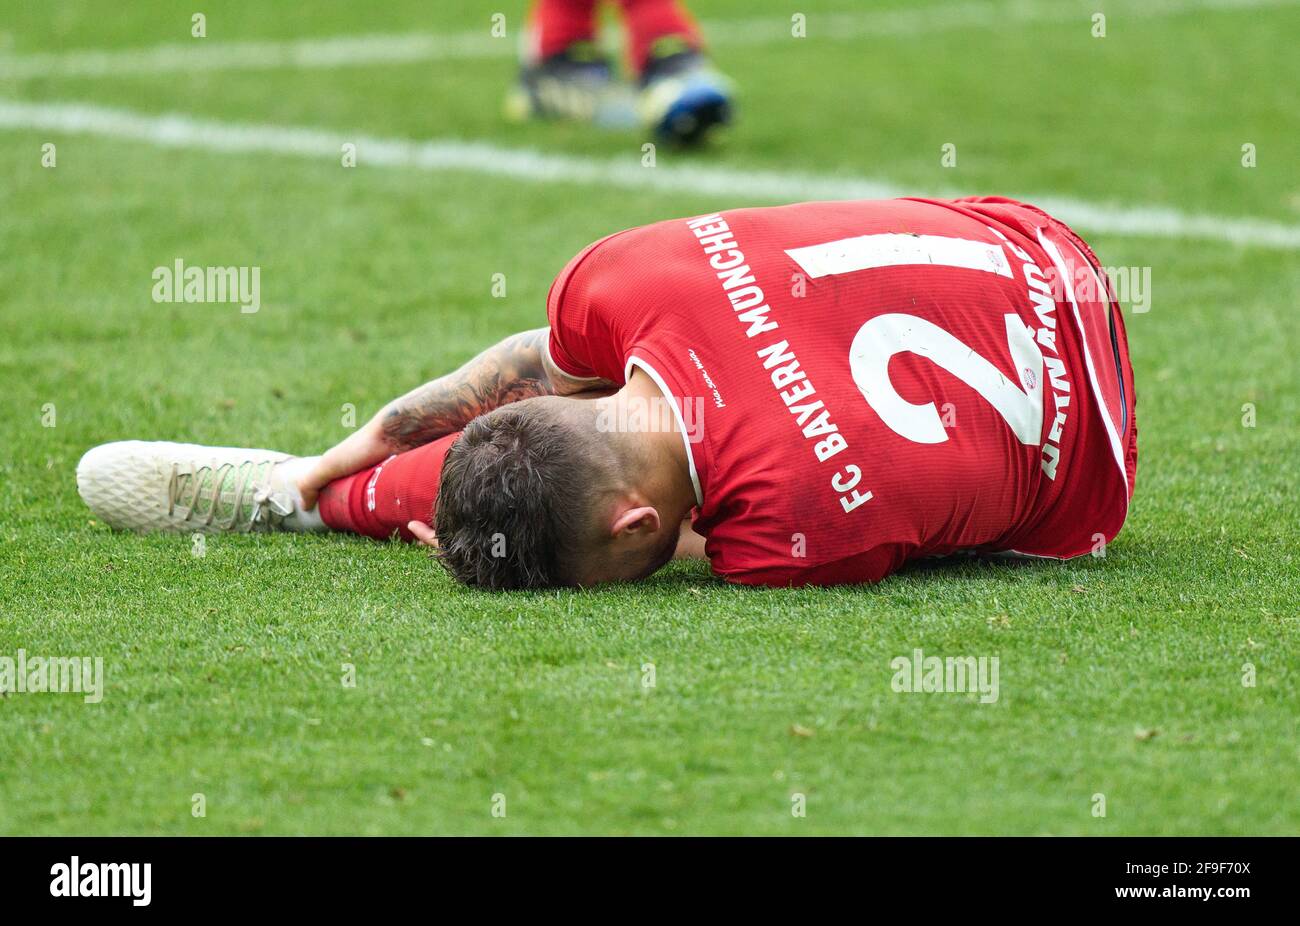 Wolfsburg, Germany. 17th Apr, 2021. Lucas HERNANDEZ (FCB 21) verletzt in the match VFL WOLFSBURG - FC BAYERN MUENCHEN  2-3 1.German Football League on April 17, 2021 in Wolfsburg, Germany  Season 2020/2021, matchday 29, 1.Bundesliga, FCB, München, 29.Spieltag, Wölfe,  © Peter Schatz / Alamy Live News   - DFL REGULATIONS PROHIBIT ANY USE OF PHOTOGRAPHS as IMAGE SEQUENCES and/or QUASI-VIDEO - Stock Photo